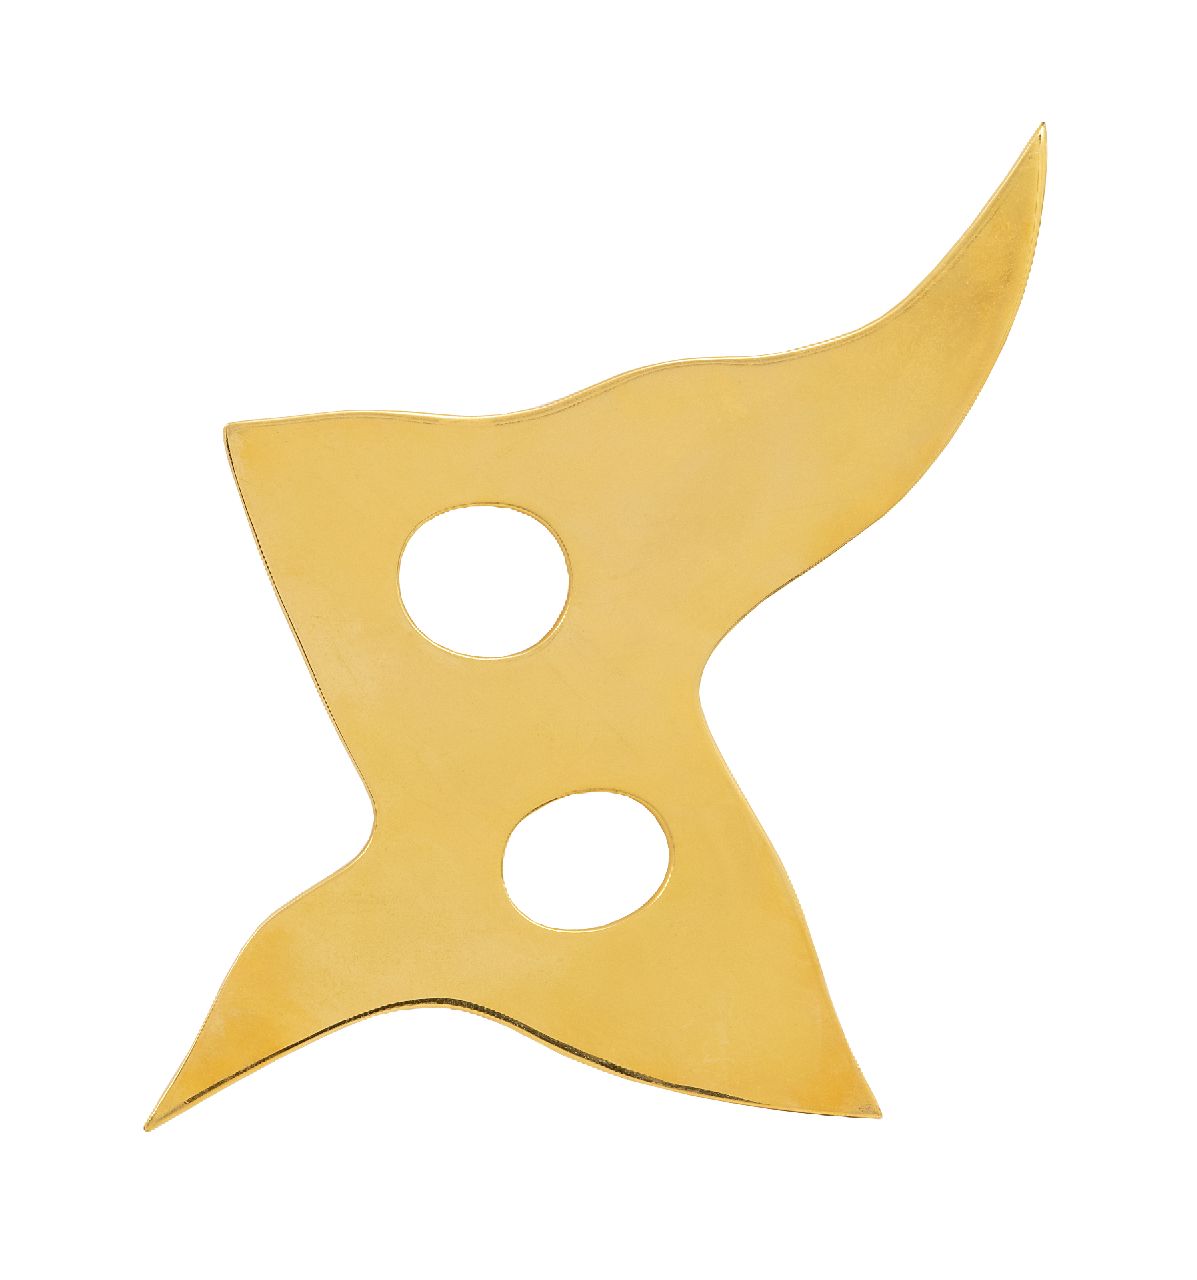 Arp H.P.W.  | 'Hans' Peter Wilhelm 'Jean' Arp | Sculptures and objects offered for sale | Masque Oiseau, gold-plated brass 15.5 x 21.3 cm, signed on the reverse with stamp 'ARP' and executed ca. 1968